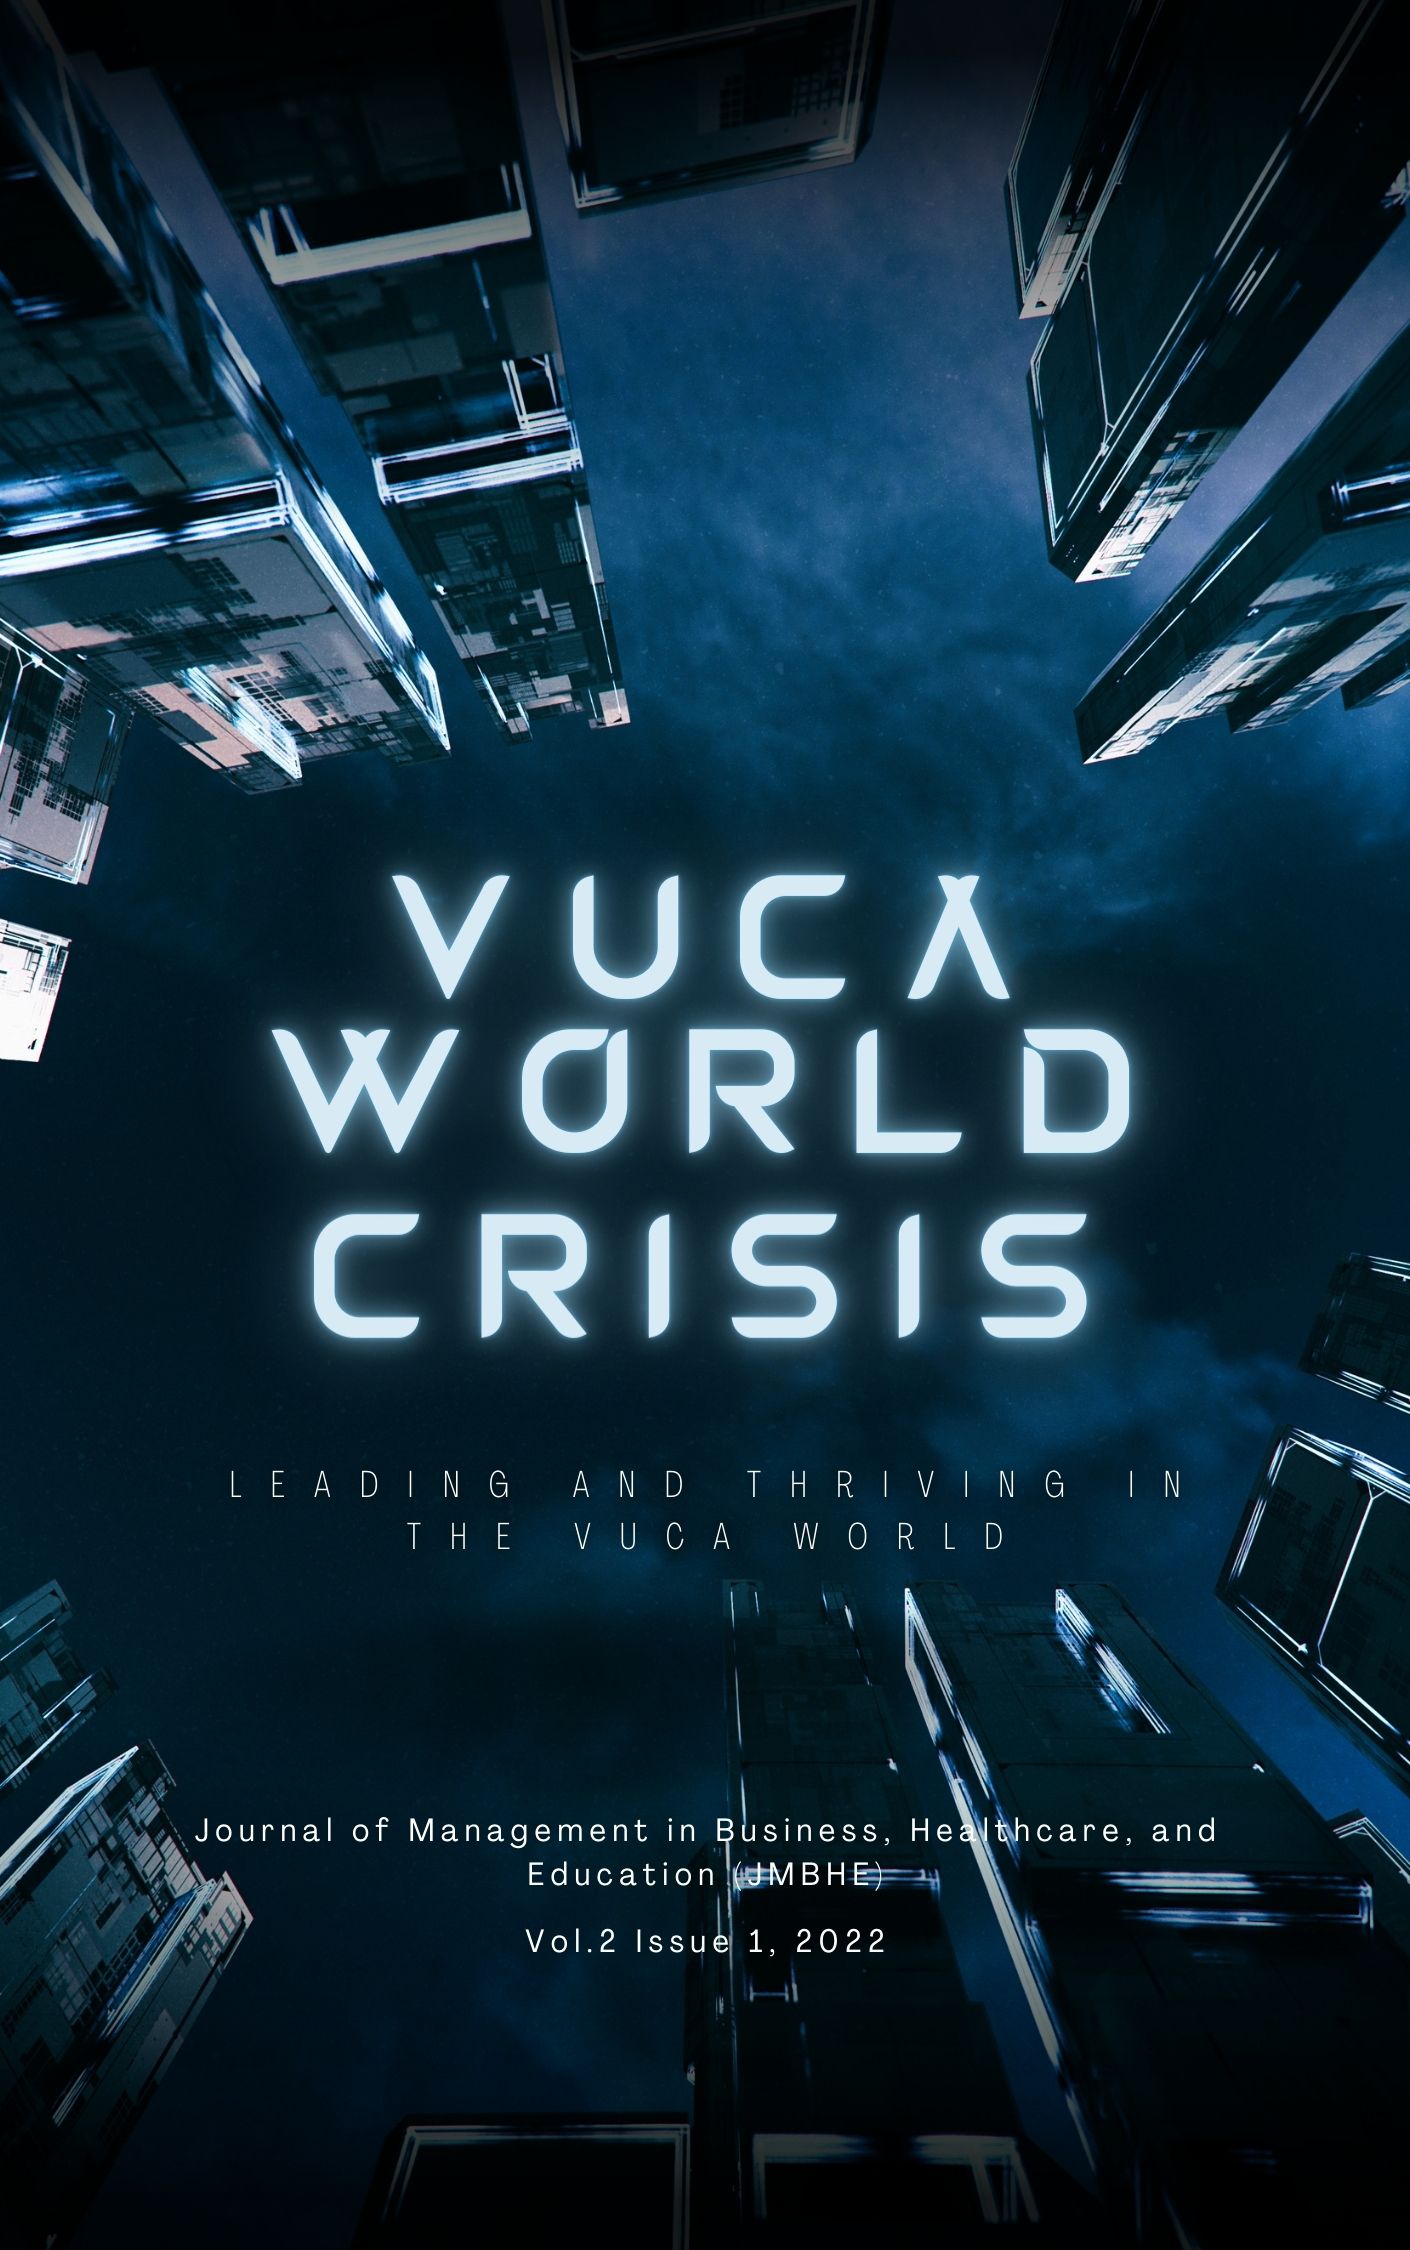 					View Vol. 2 No. 1 (2022): Leading and Thriving in the VUCA world
				